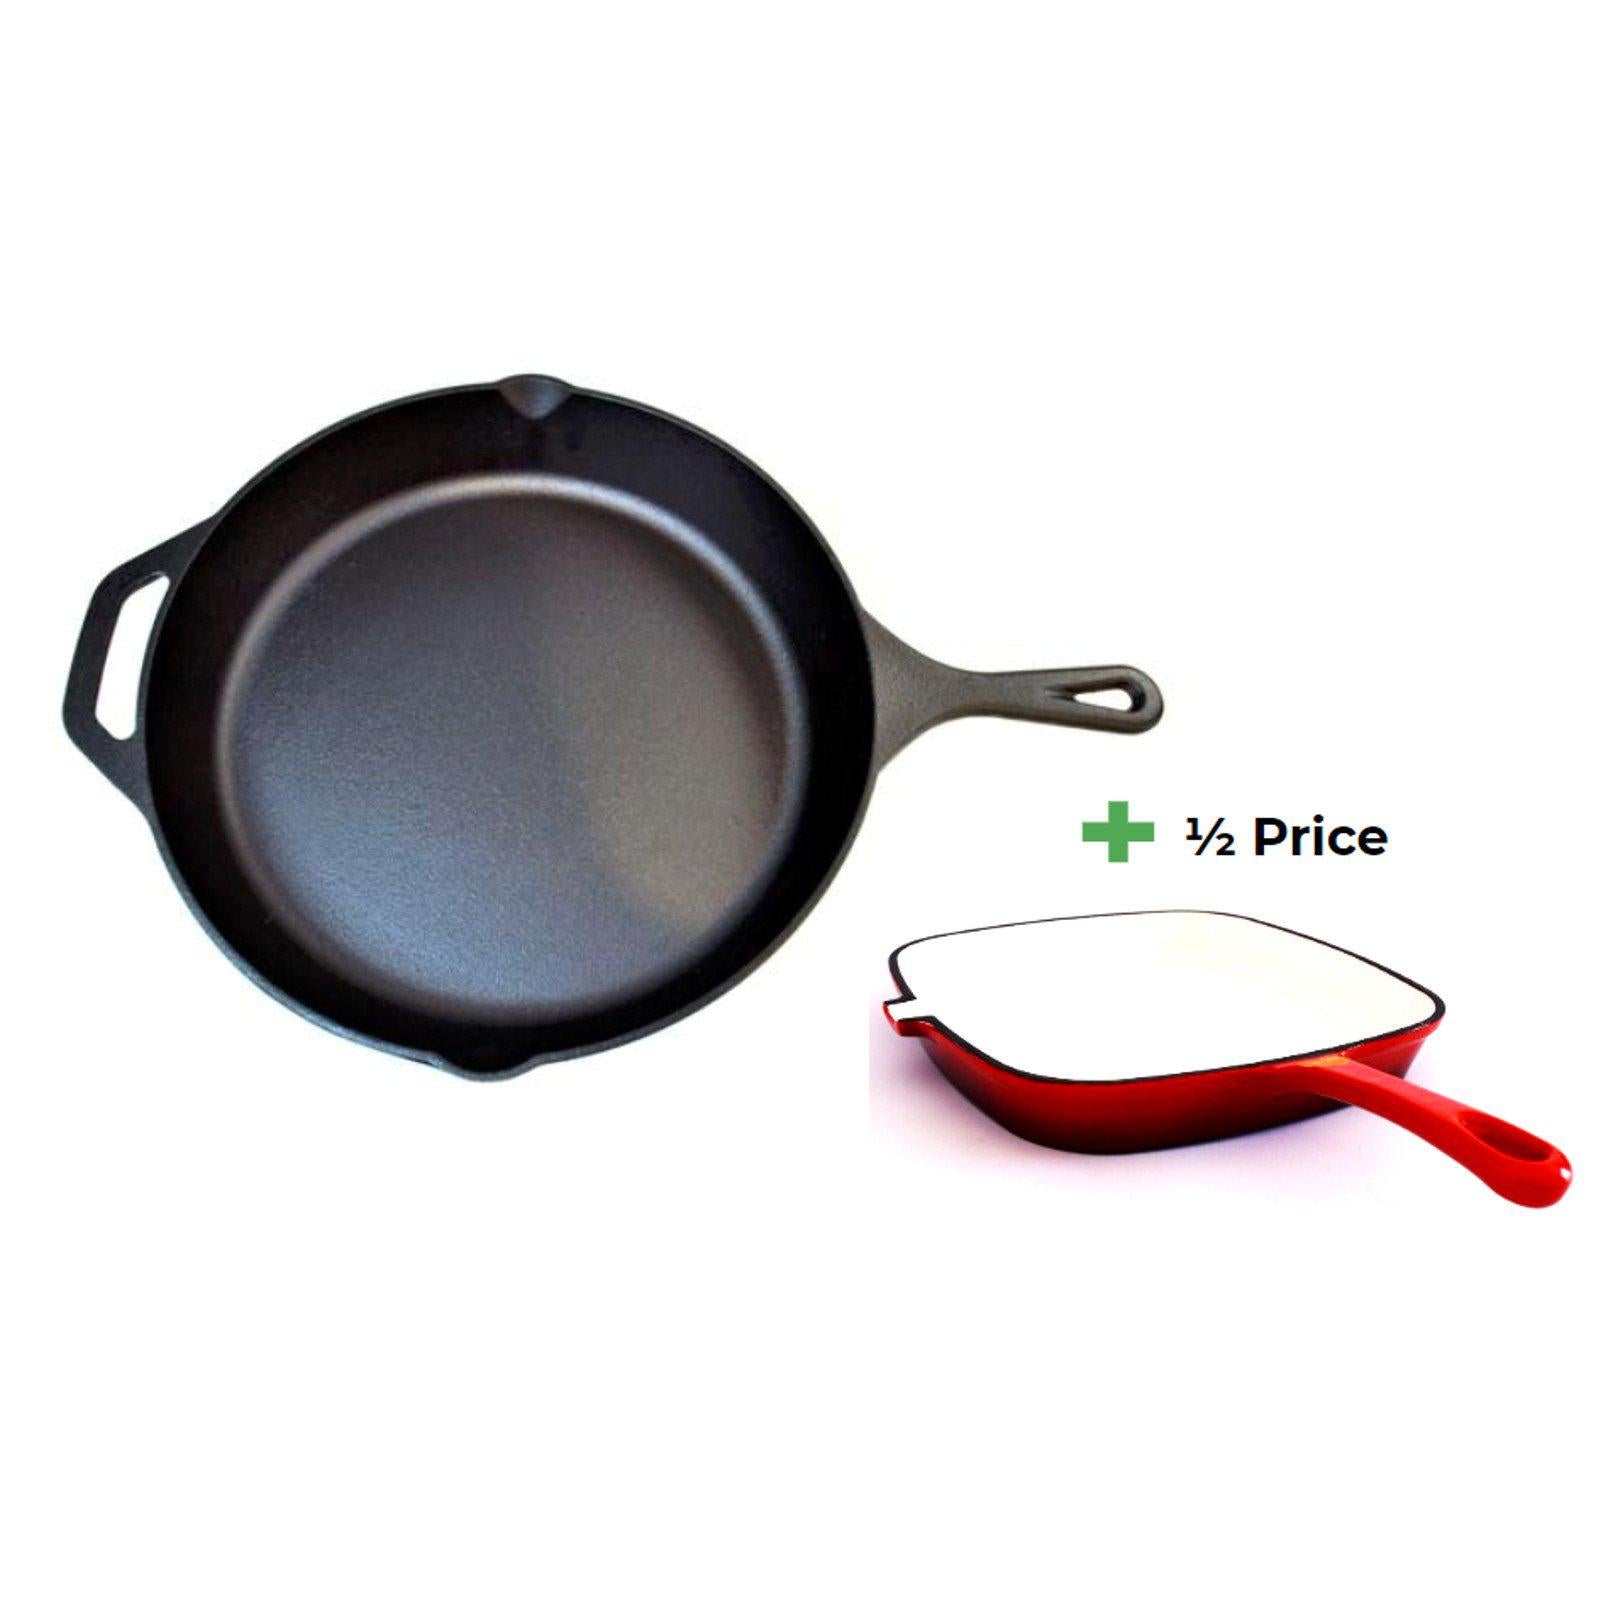 Chef's Quality Cast Iron Skillet and Griddle Bundle-Frying Pan-Chef's Quality Cookware